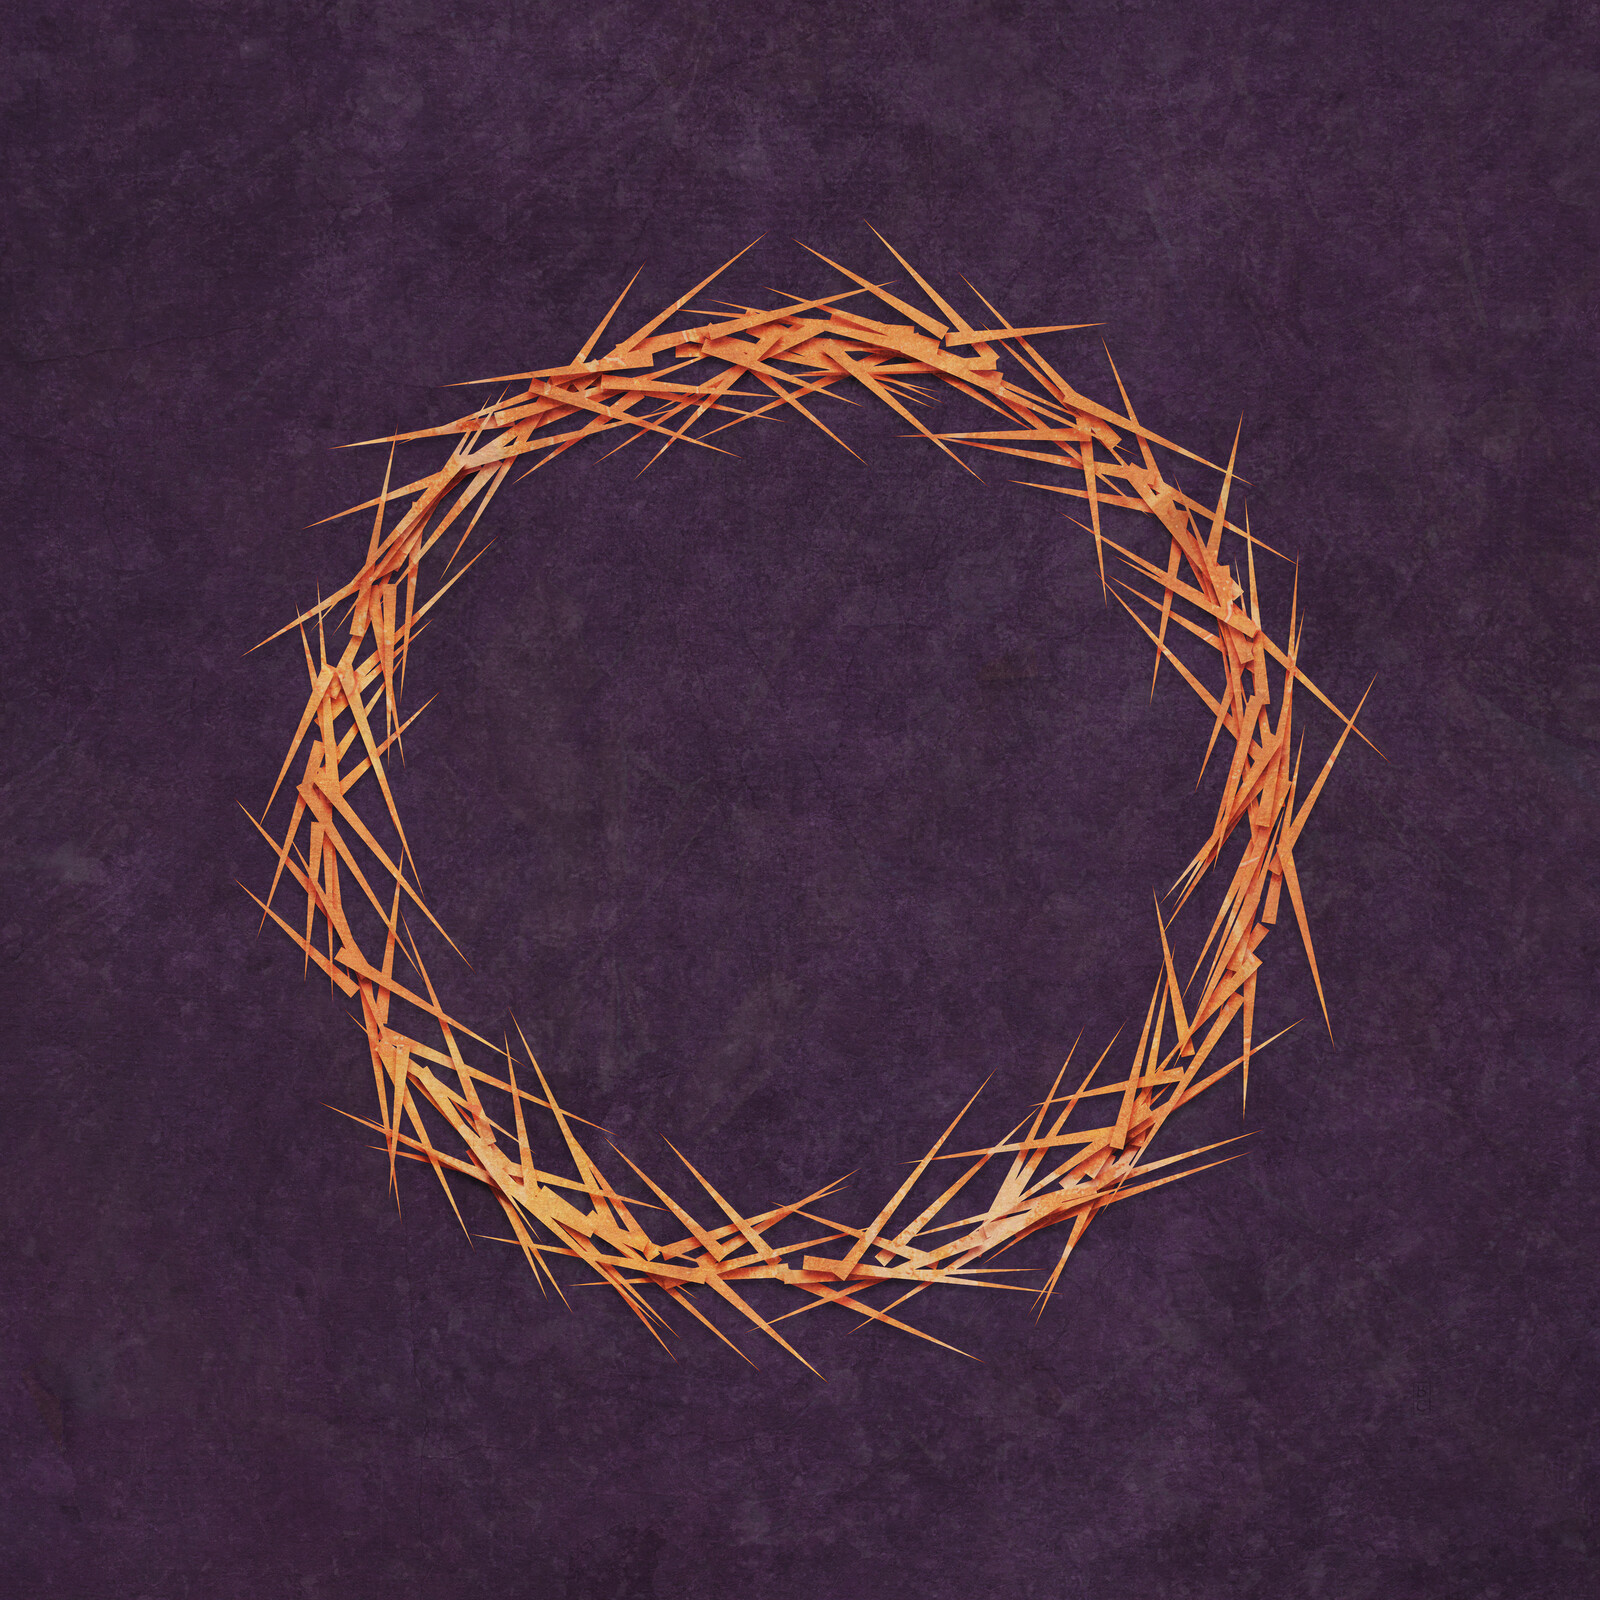 A circle made of thin, long triangles, on a purple background